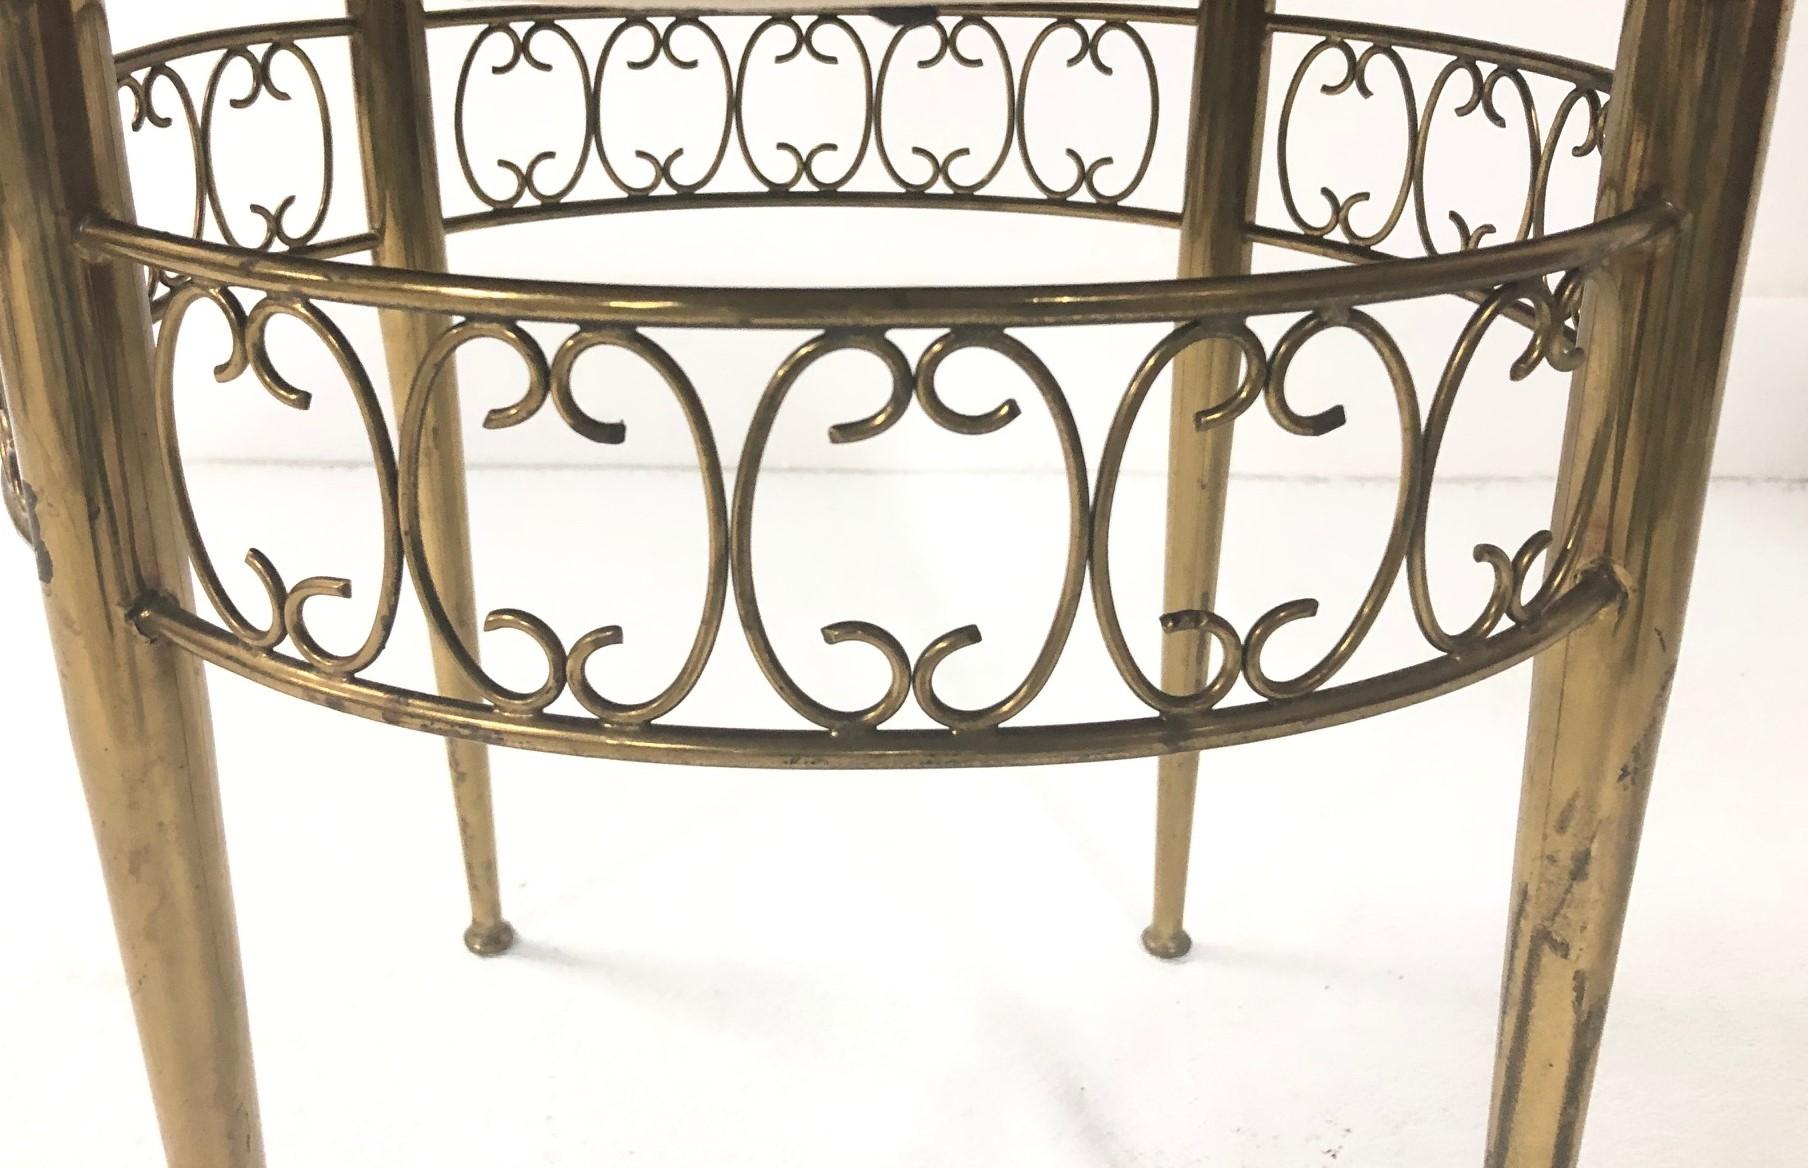 Decorative French bronze bench / stool with a linen-blend upholstered seat.